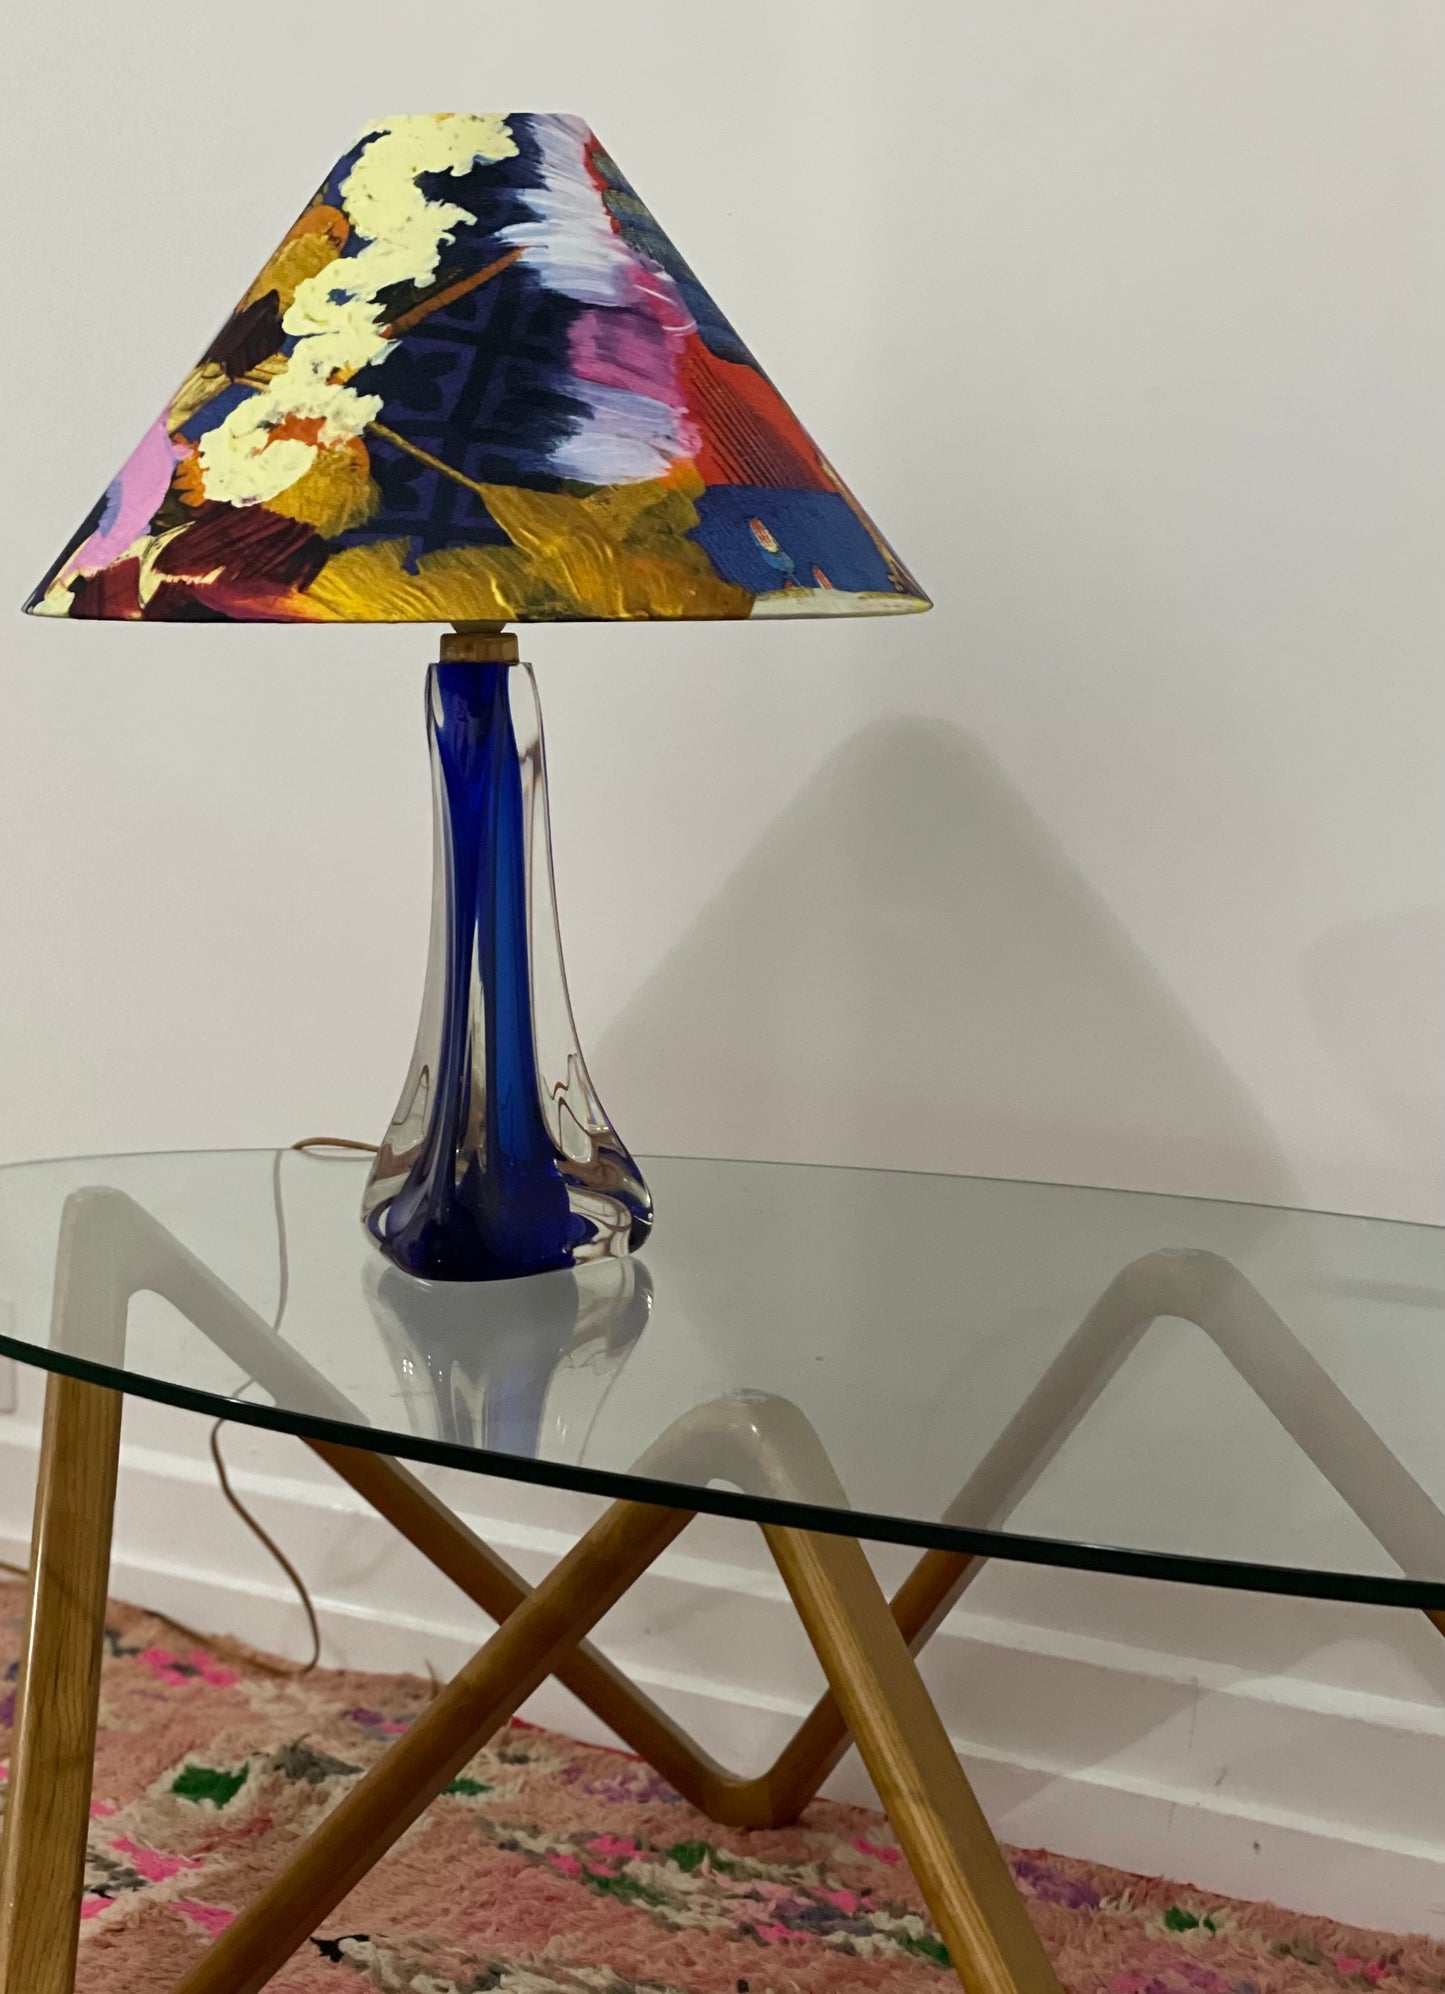 Cobalt Blue Glass Table Lamp with Shilo Engelbrecht Lamp Shade